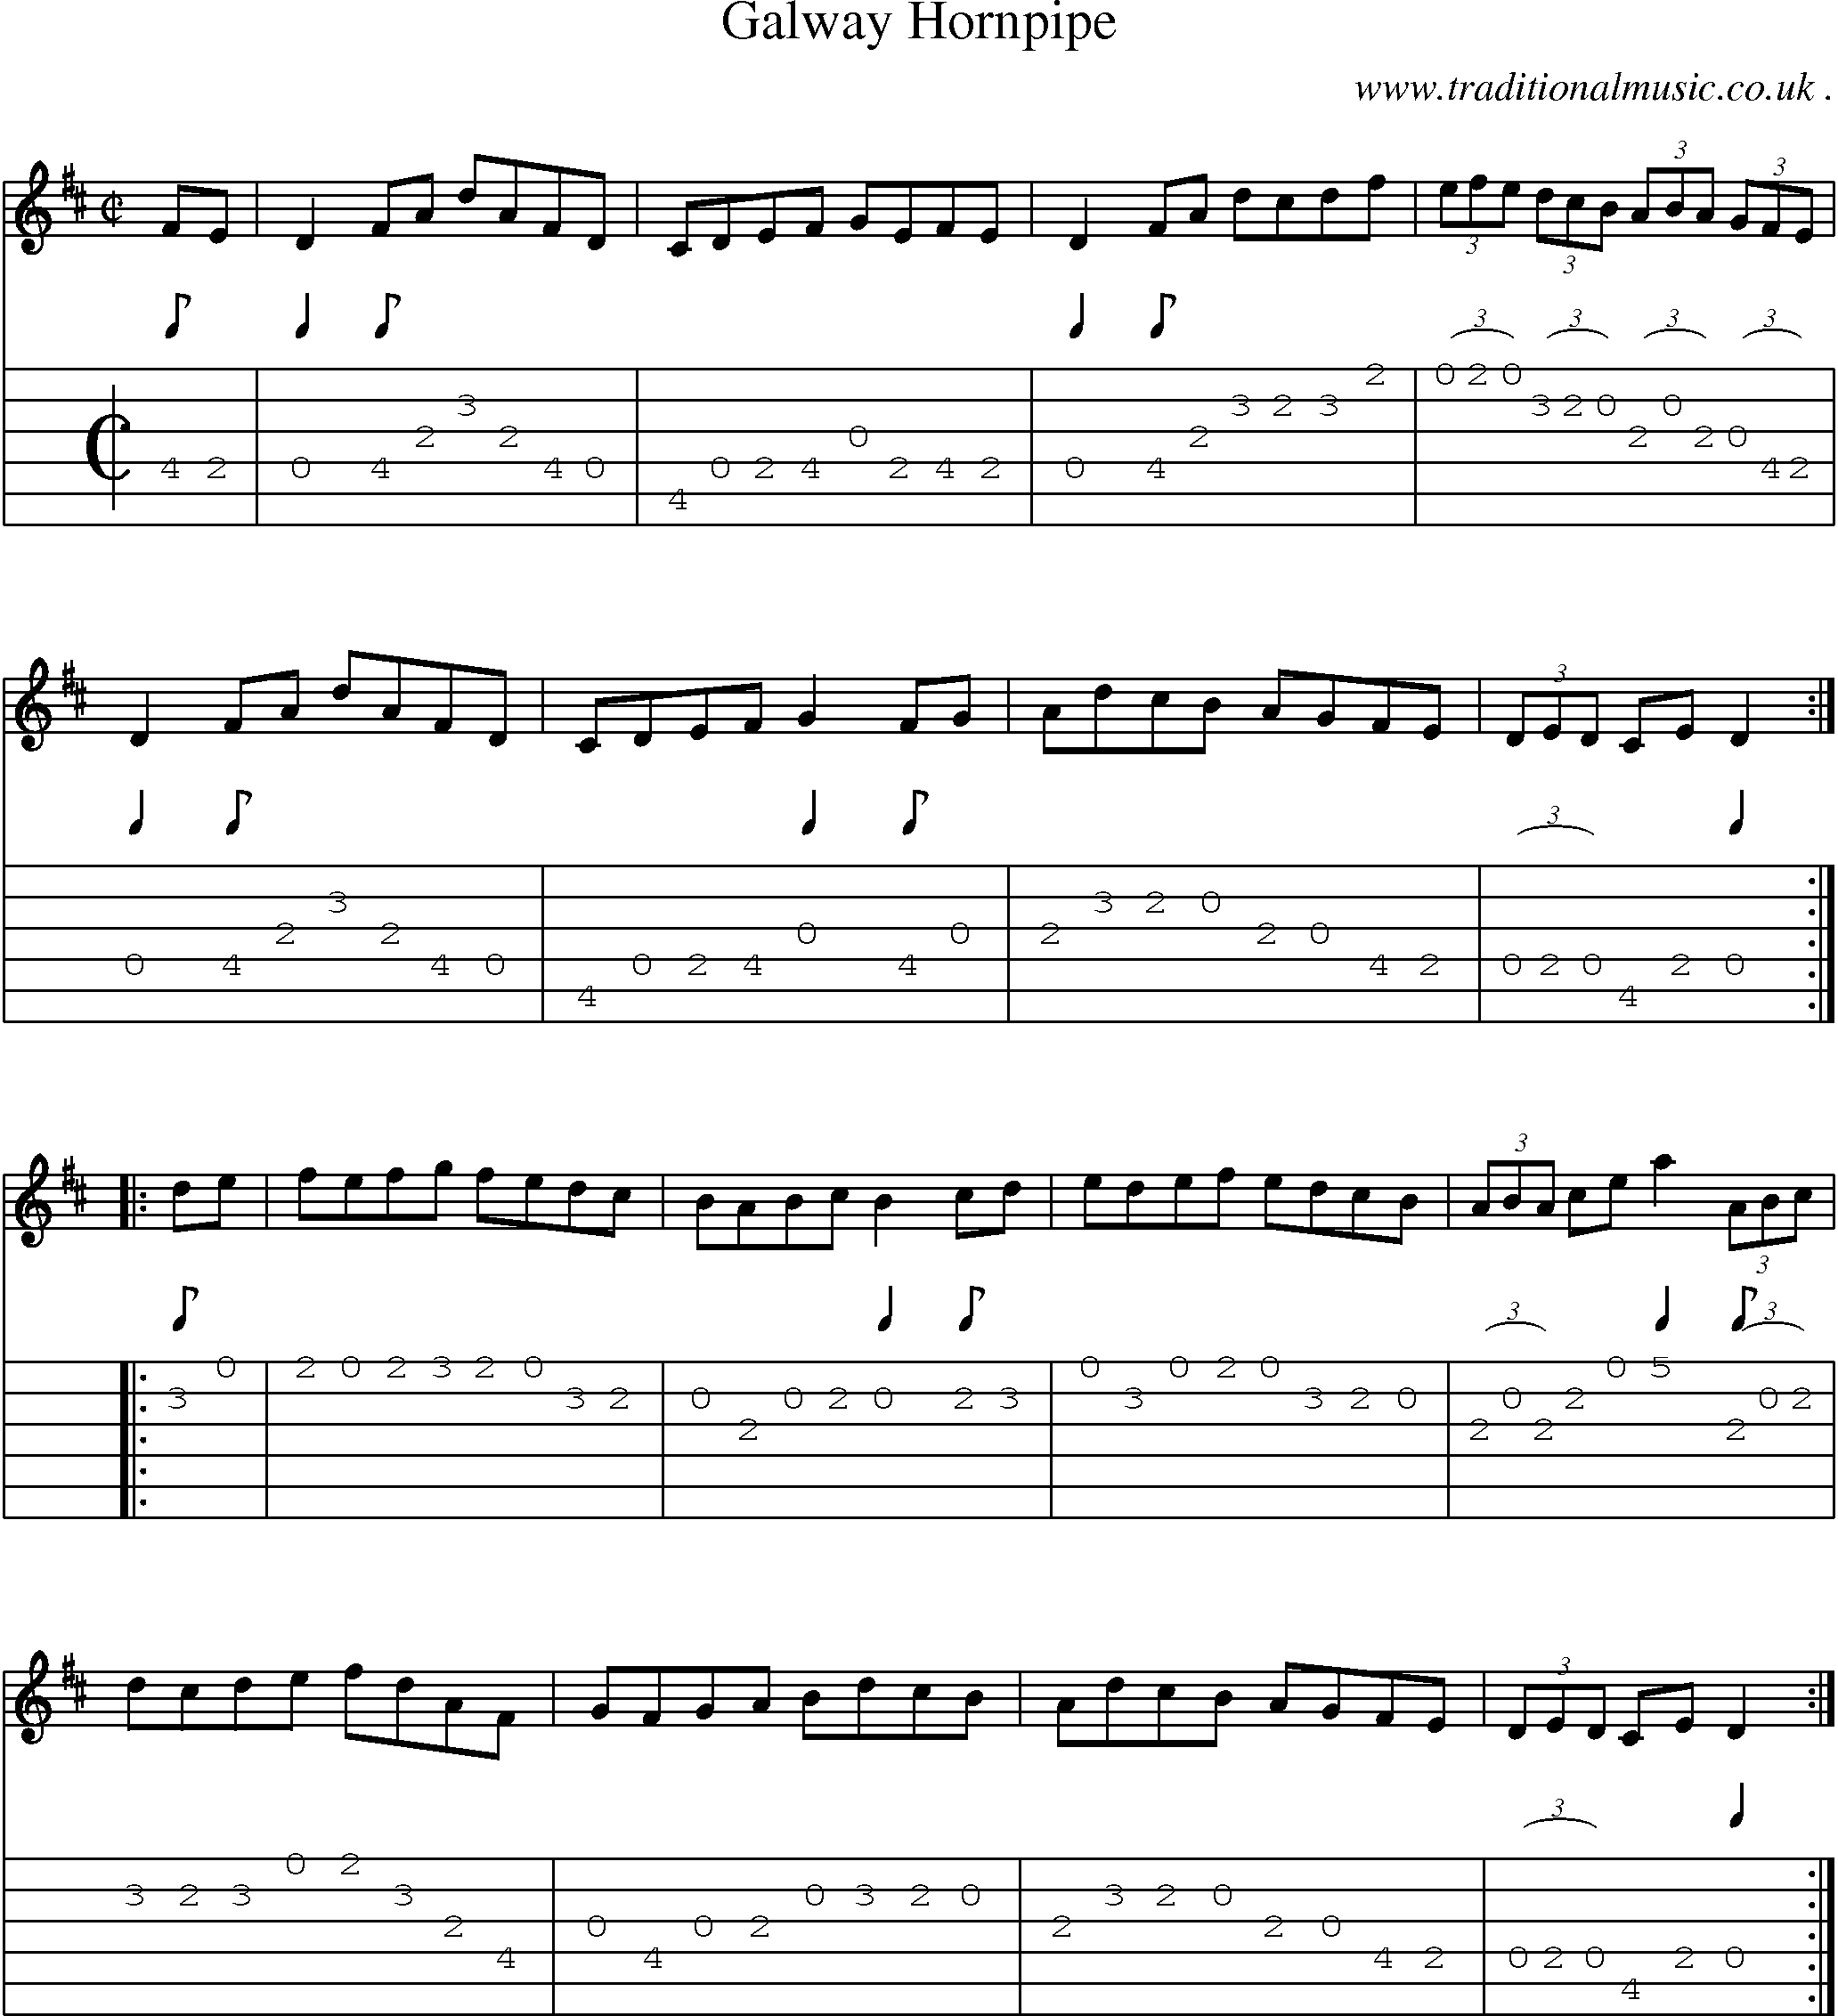 Sheet-Music and Guitar Tabs for Galway Hornpipe